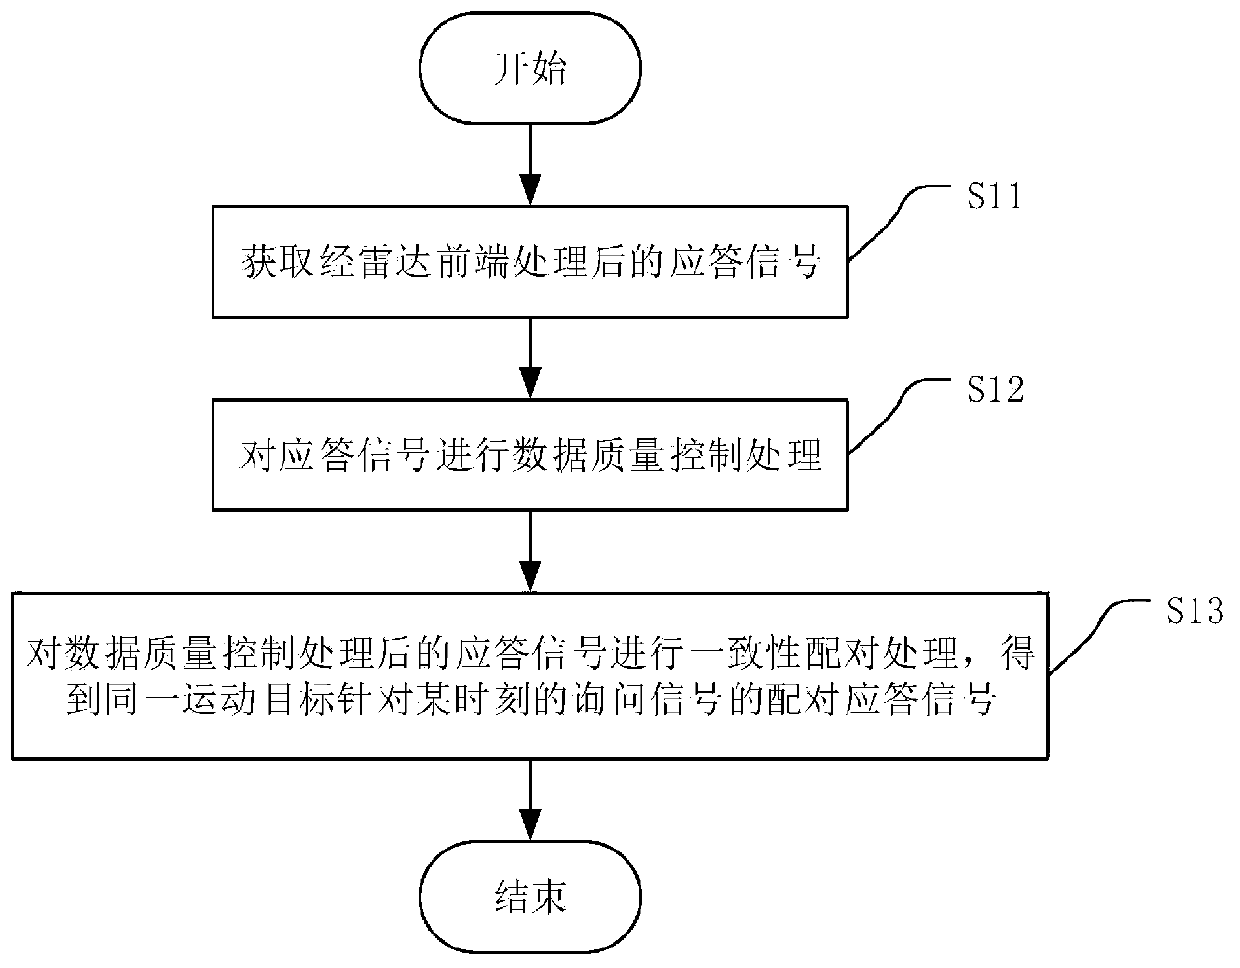 Pairing method used for distributed multi-point positioning and monitoring system